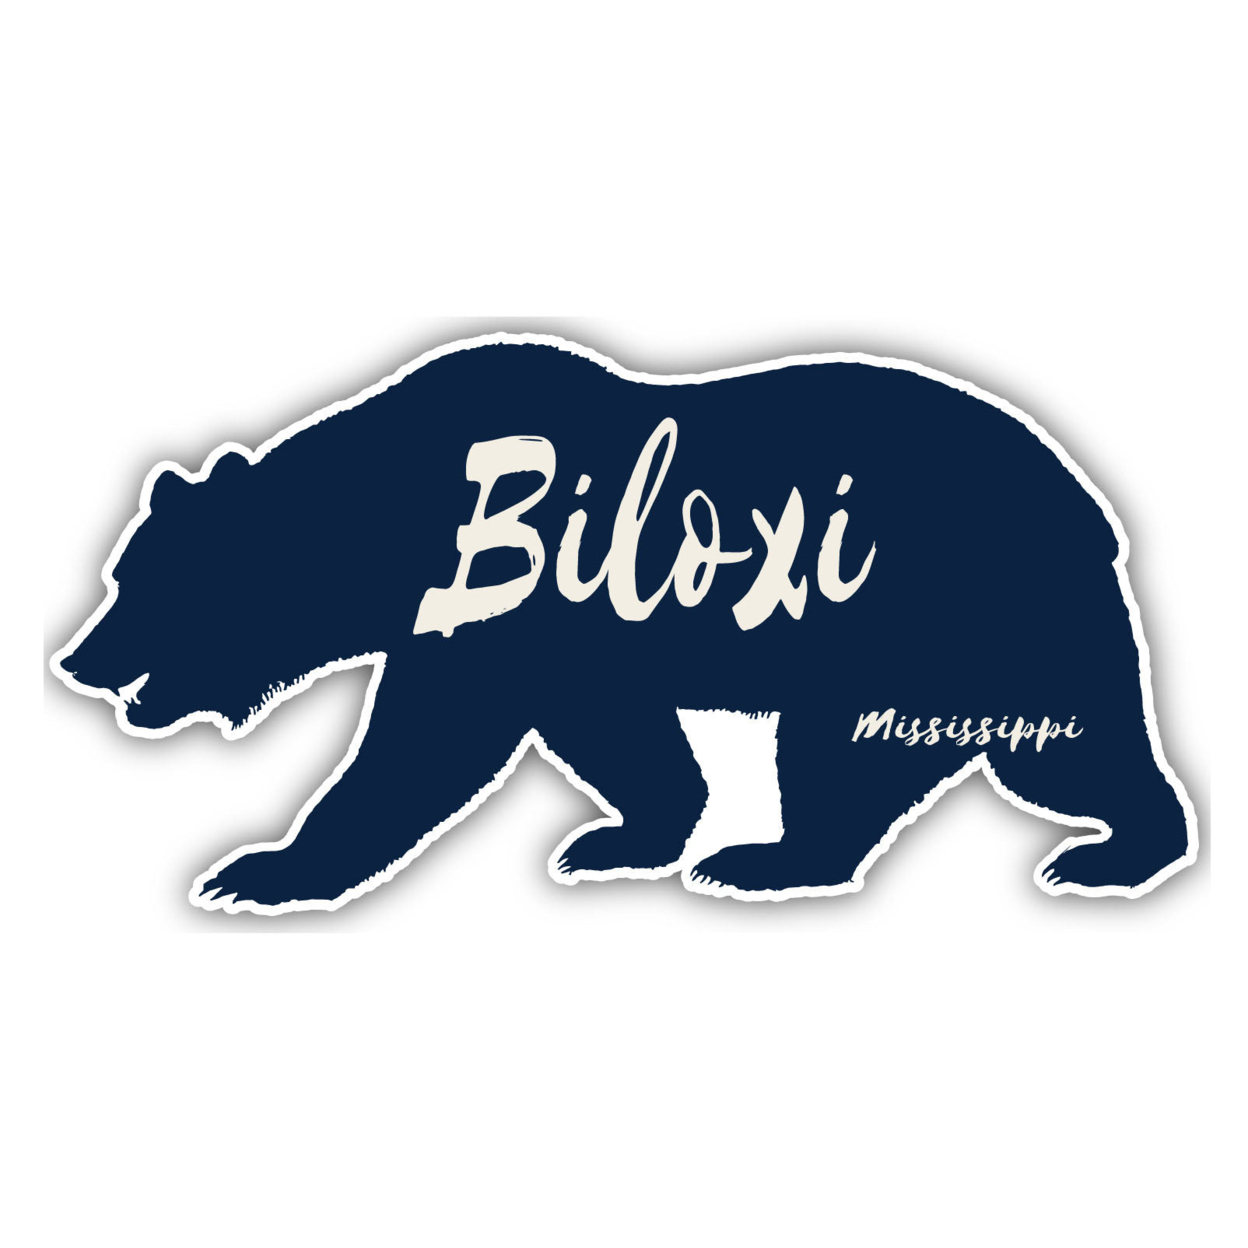 Biloxi Mississippi Souvenir Decorative Stickers (Choose Theme And Size) - 4-Pack, 10-Inch, Camp Life